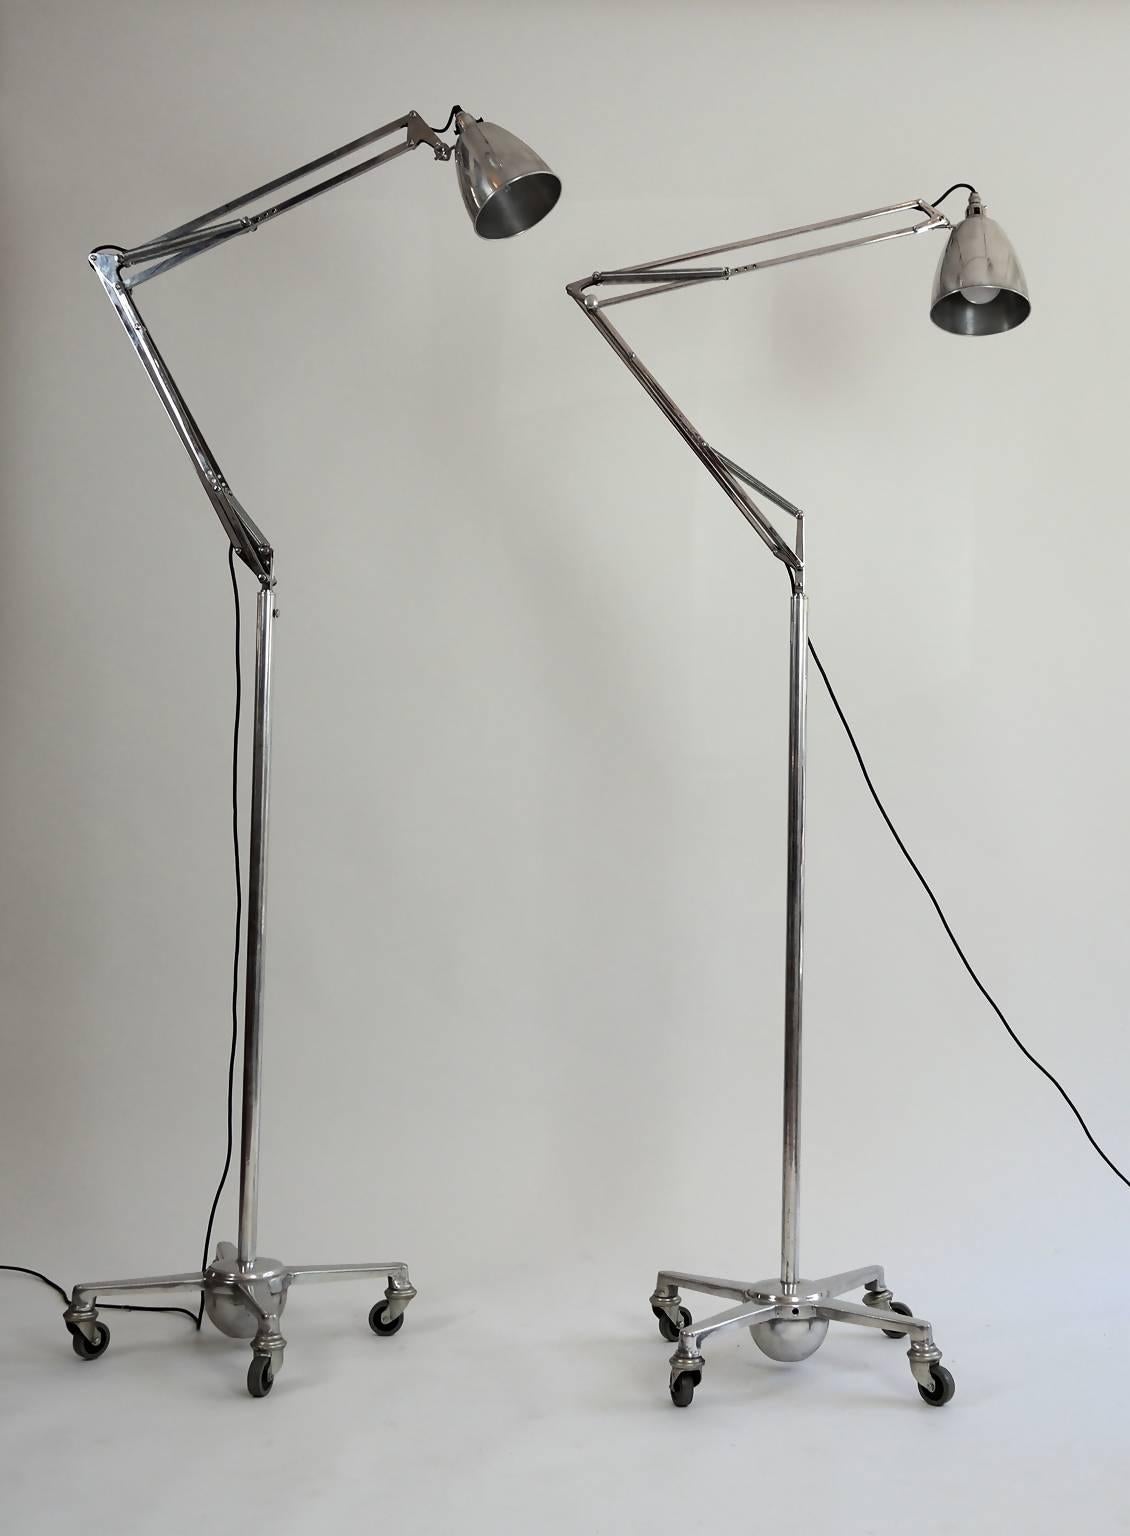 Bauhaus 1920s Anglepoise Floor Lamp from Herbert Terry For Sale